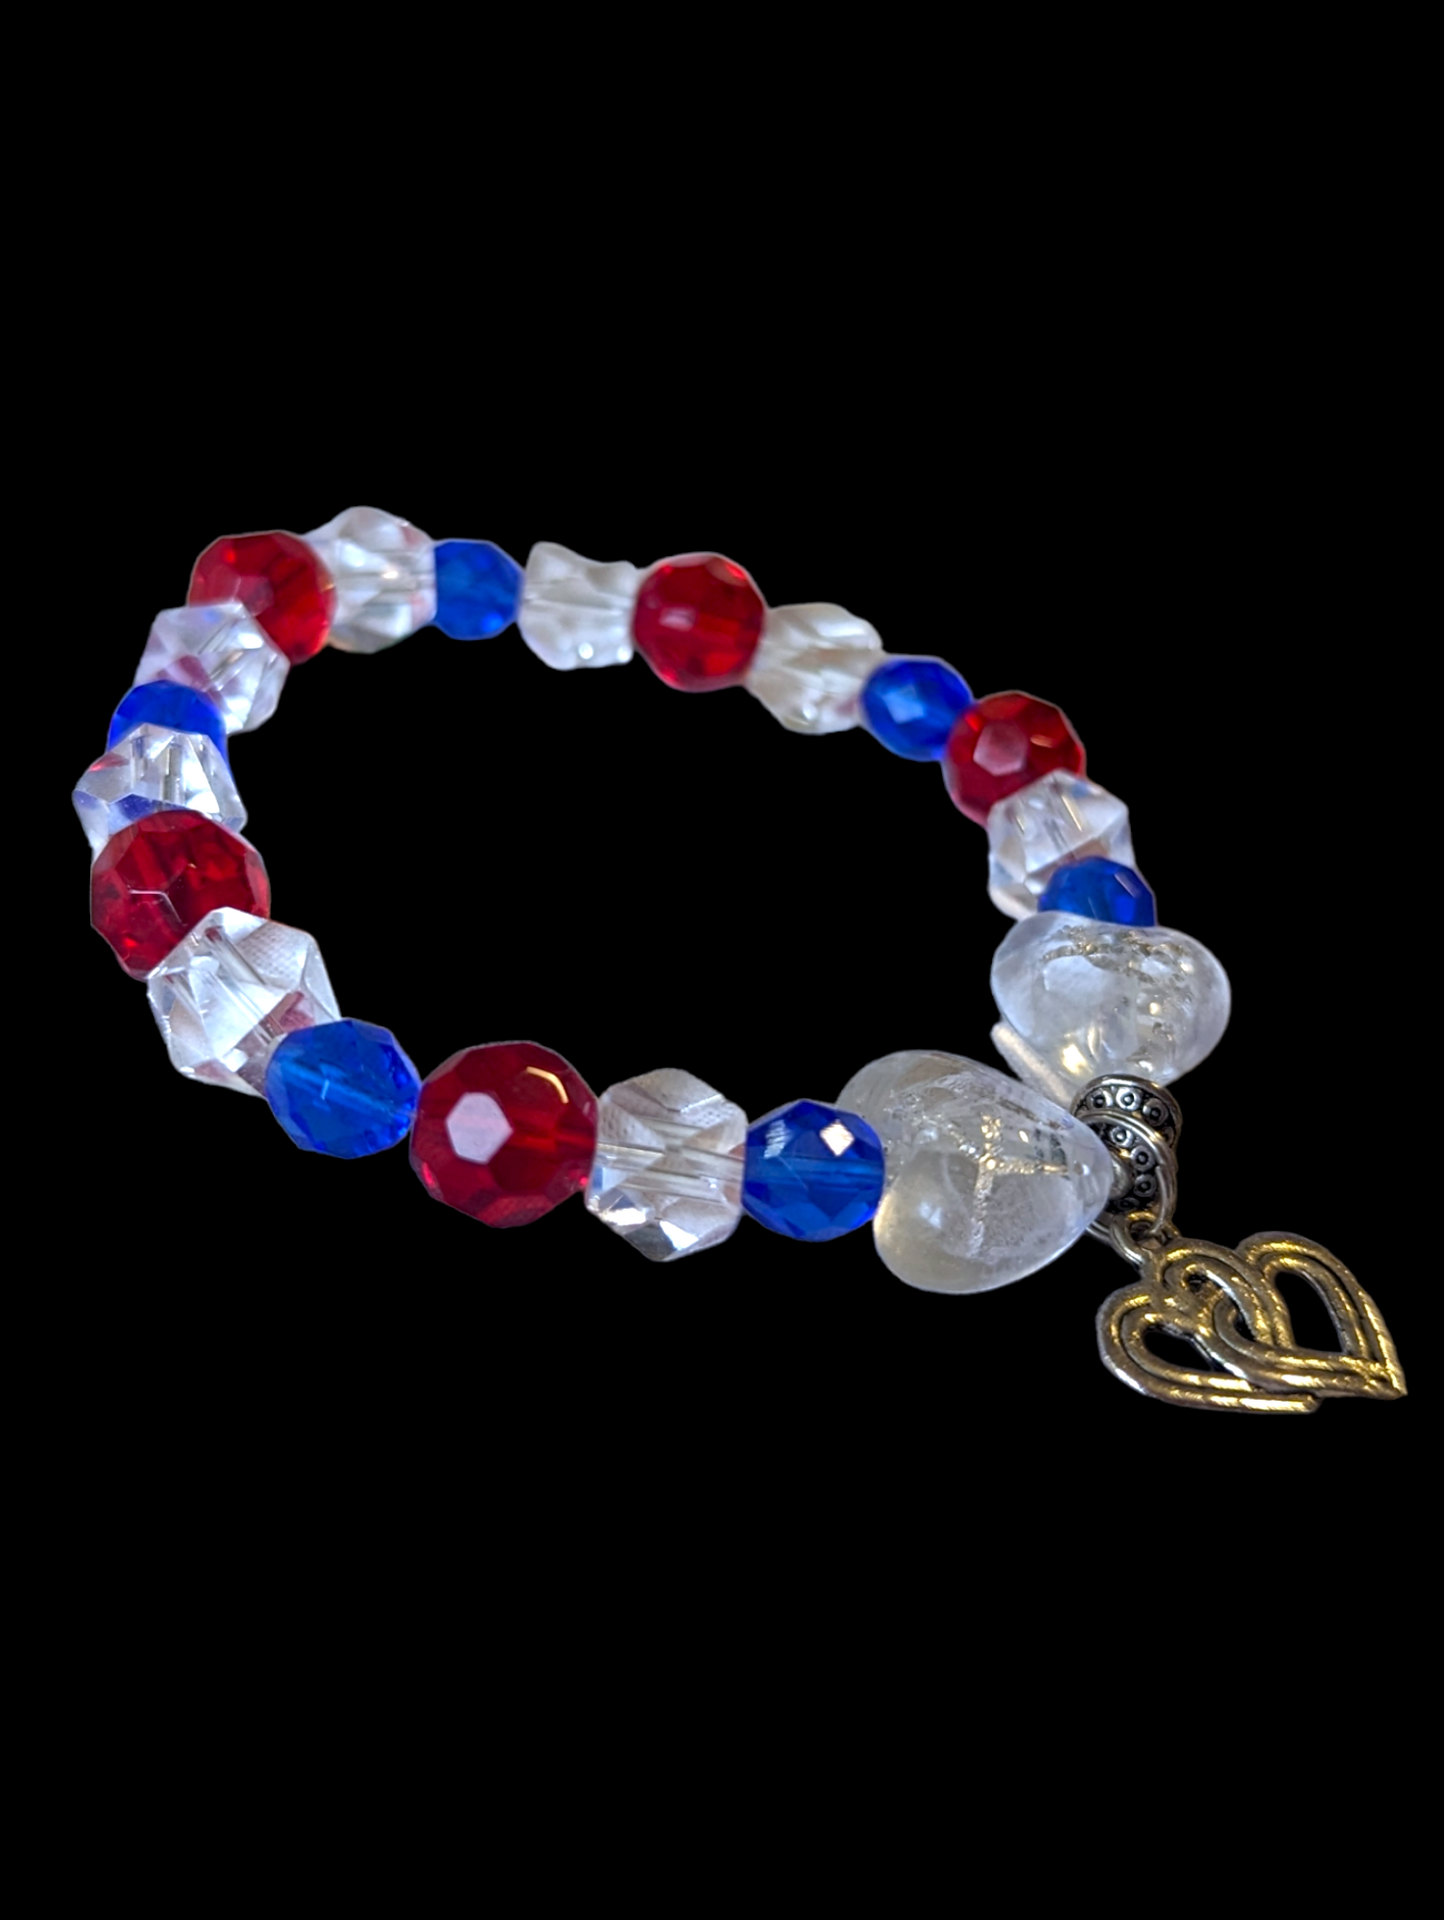 Vintage Cut Crystal Heart Charm Bracelet in Red, White and Blue